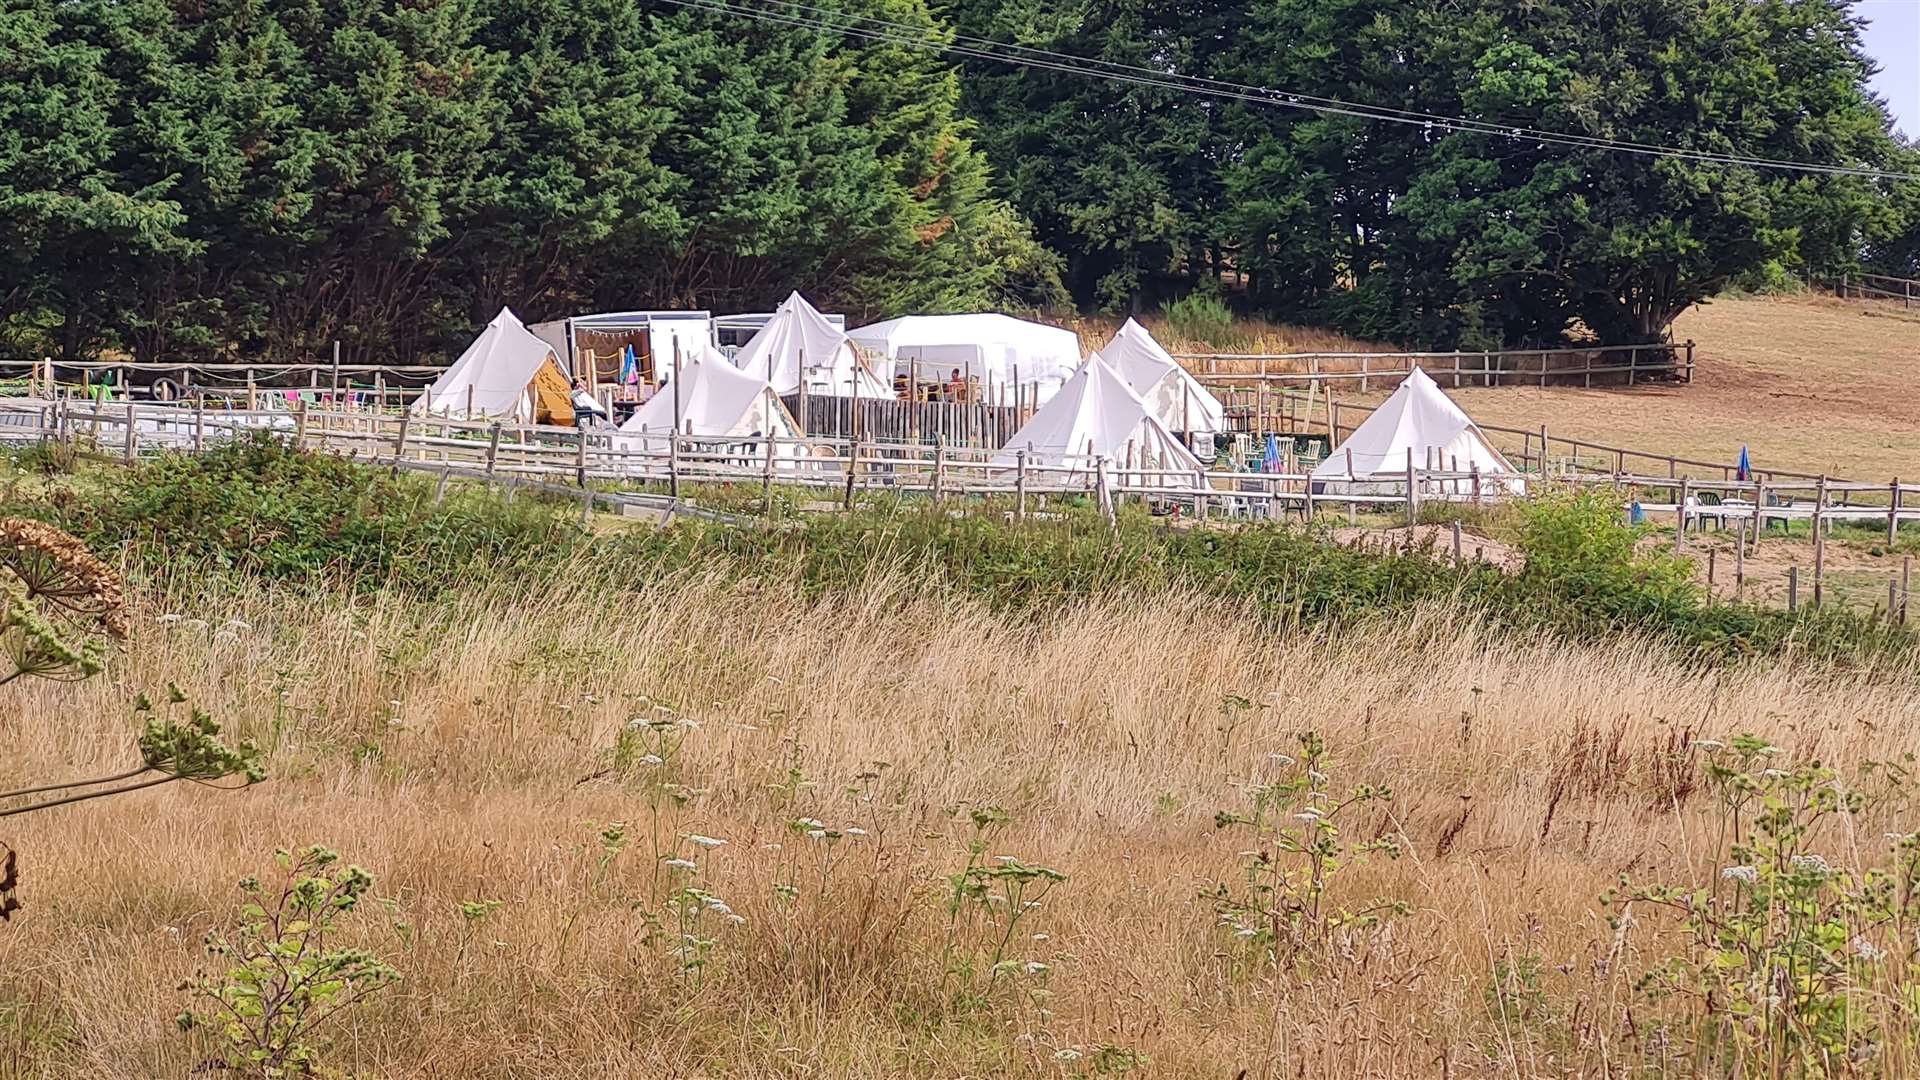 The controversial Walnut Tree glamping site in Westbere near Canterbury